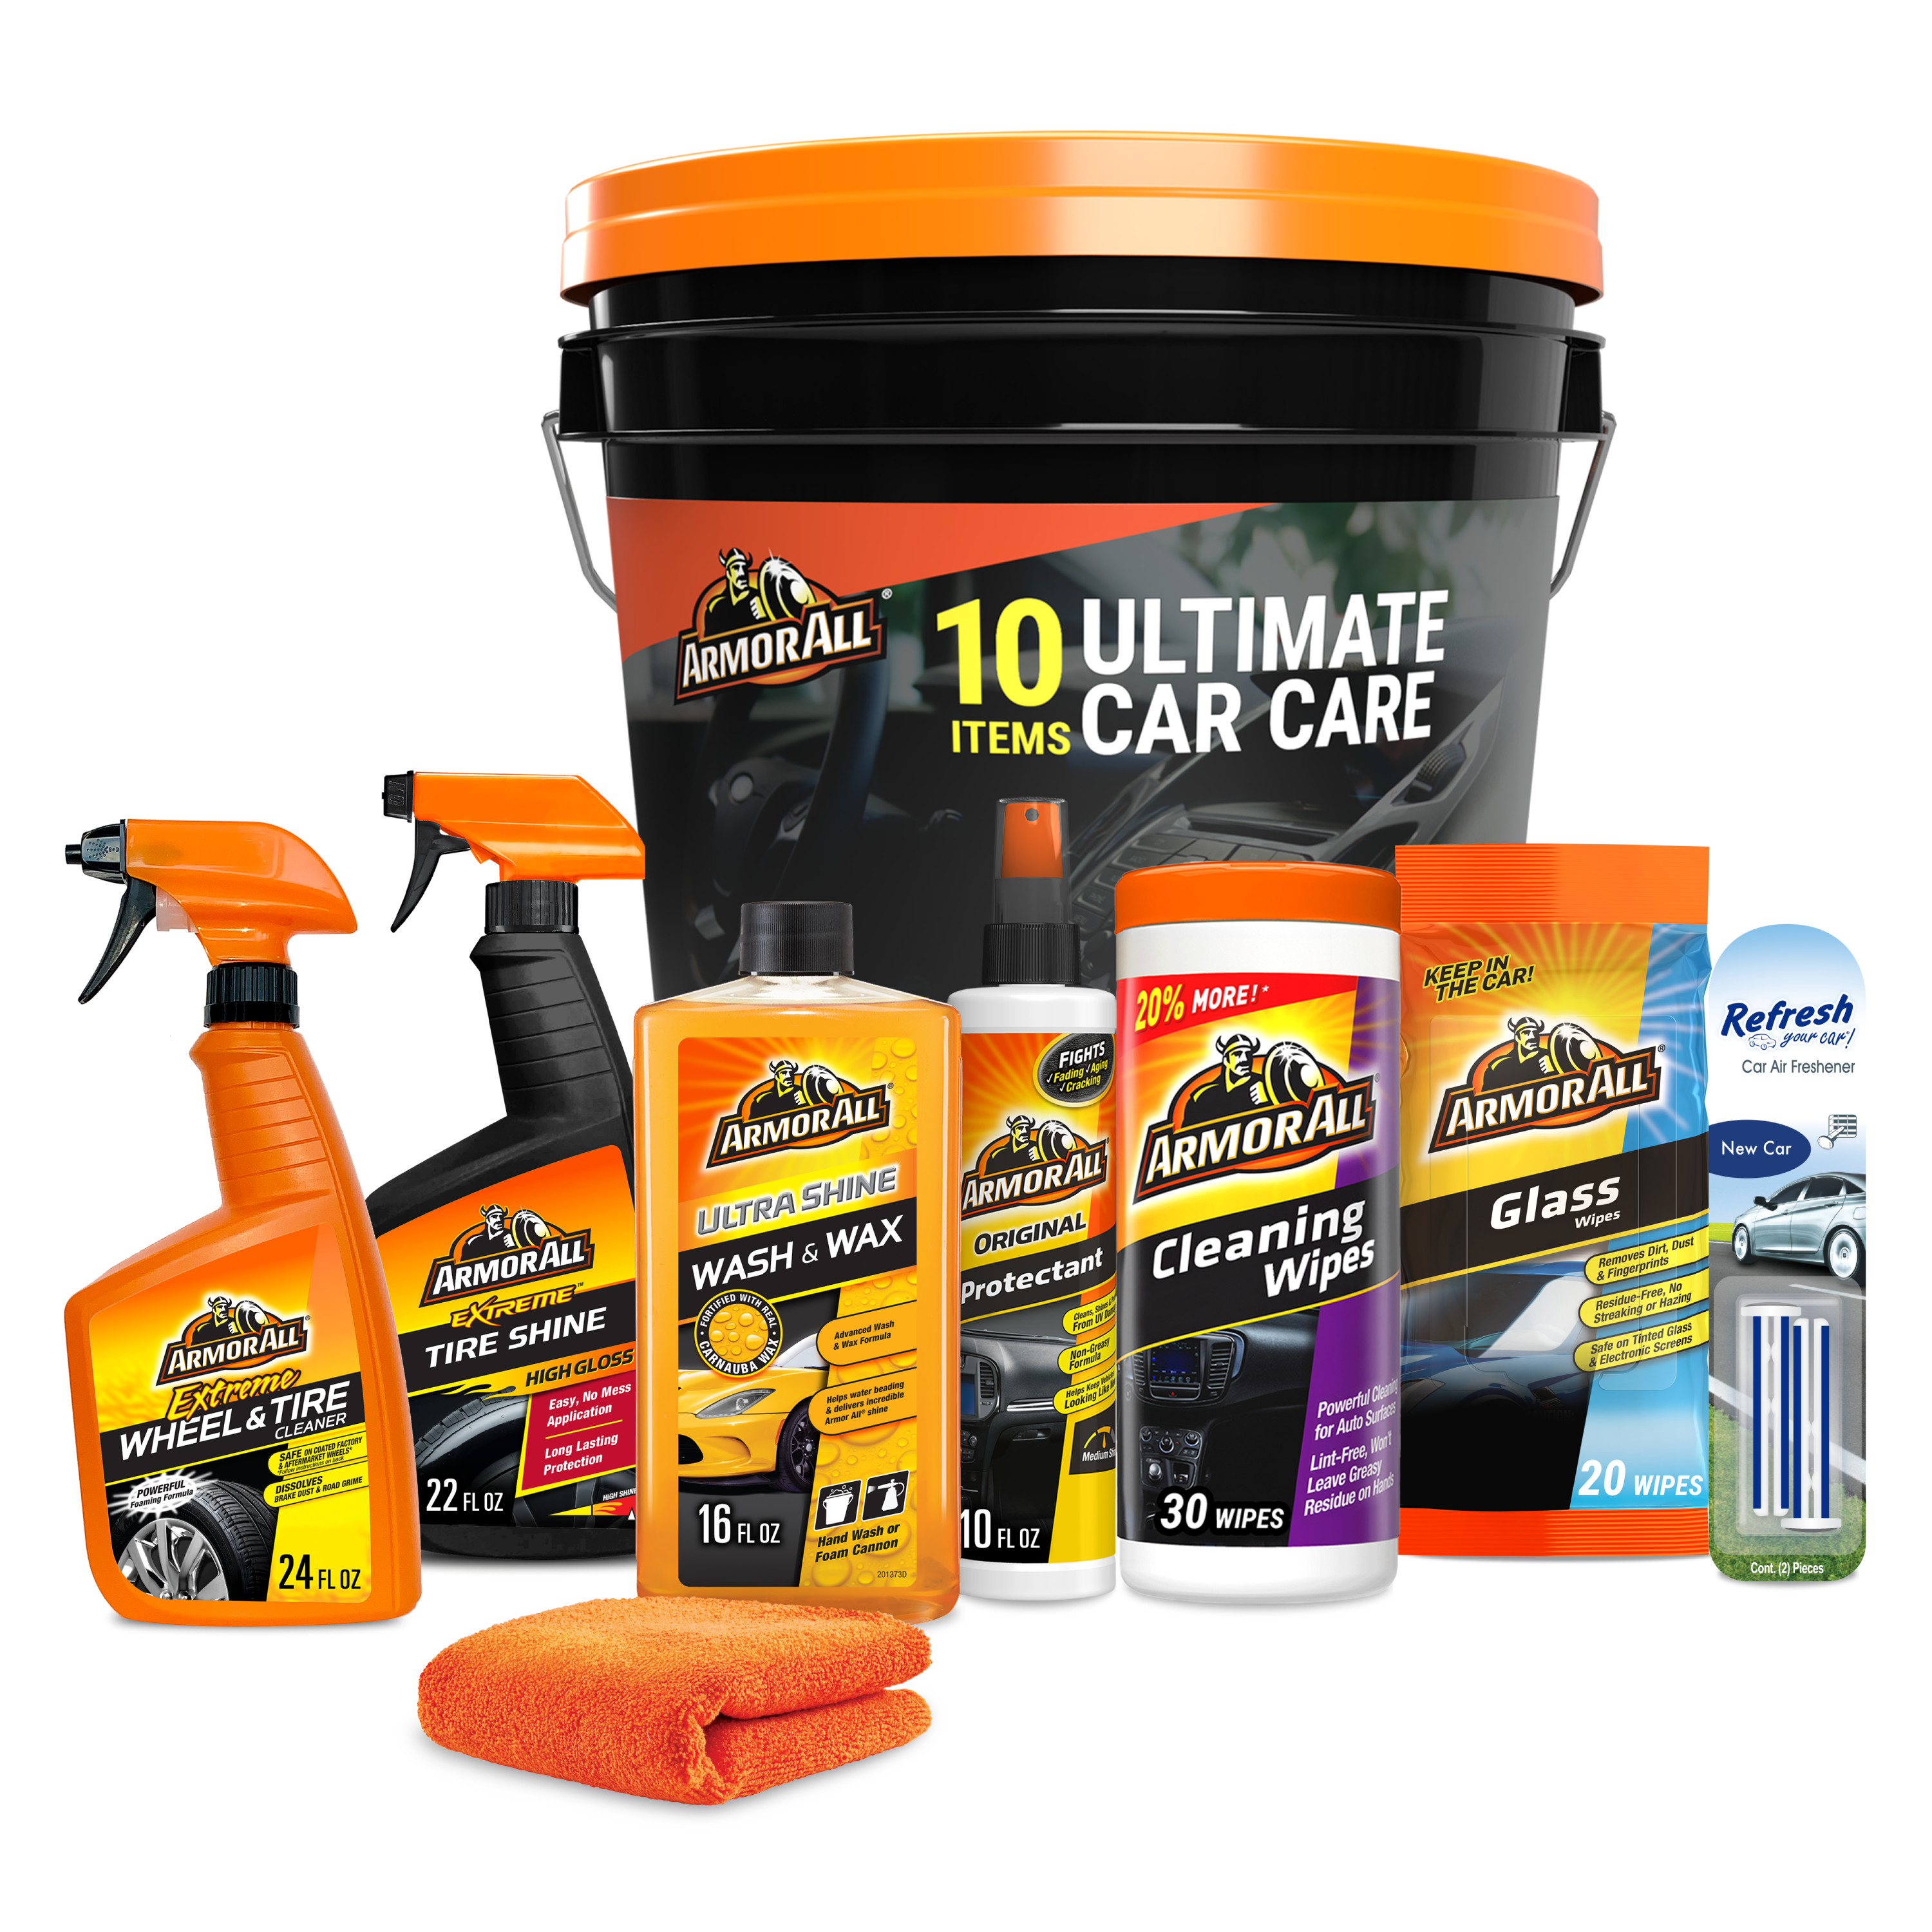 Armor All Holiday Car Cleaning Kit, 10-Piece Holiday Gift Set - image 1 of 10